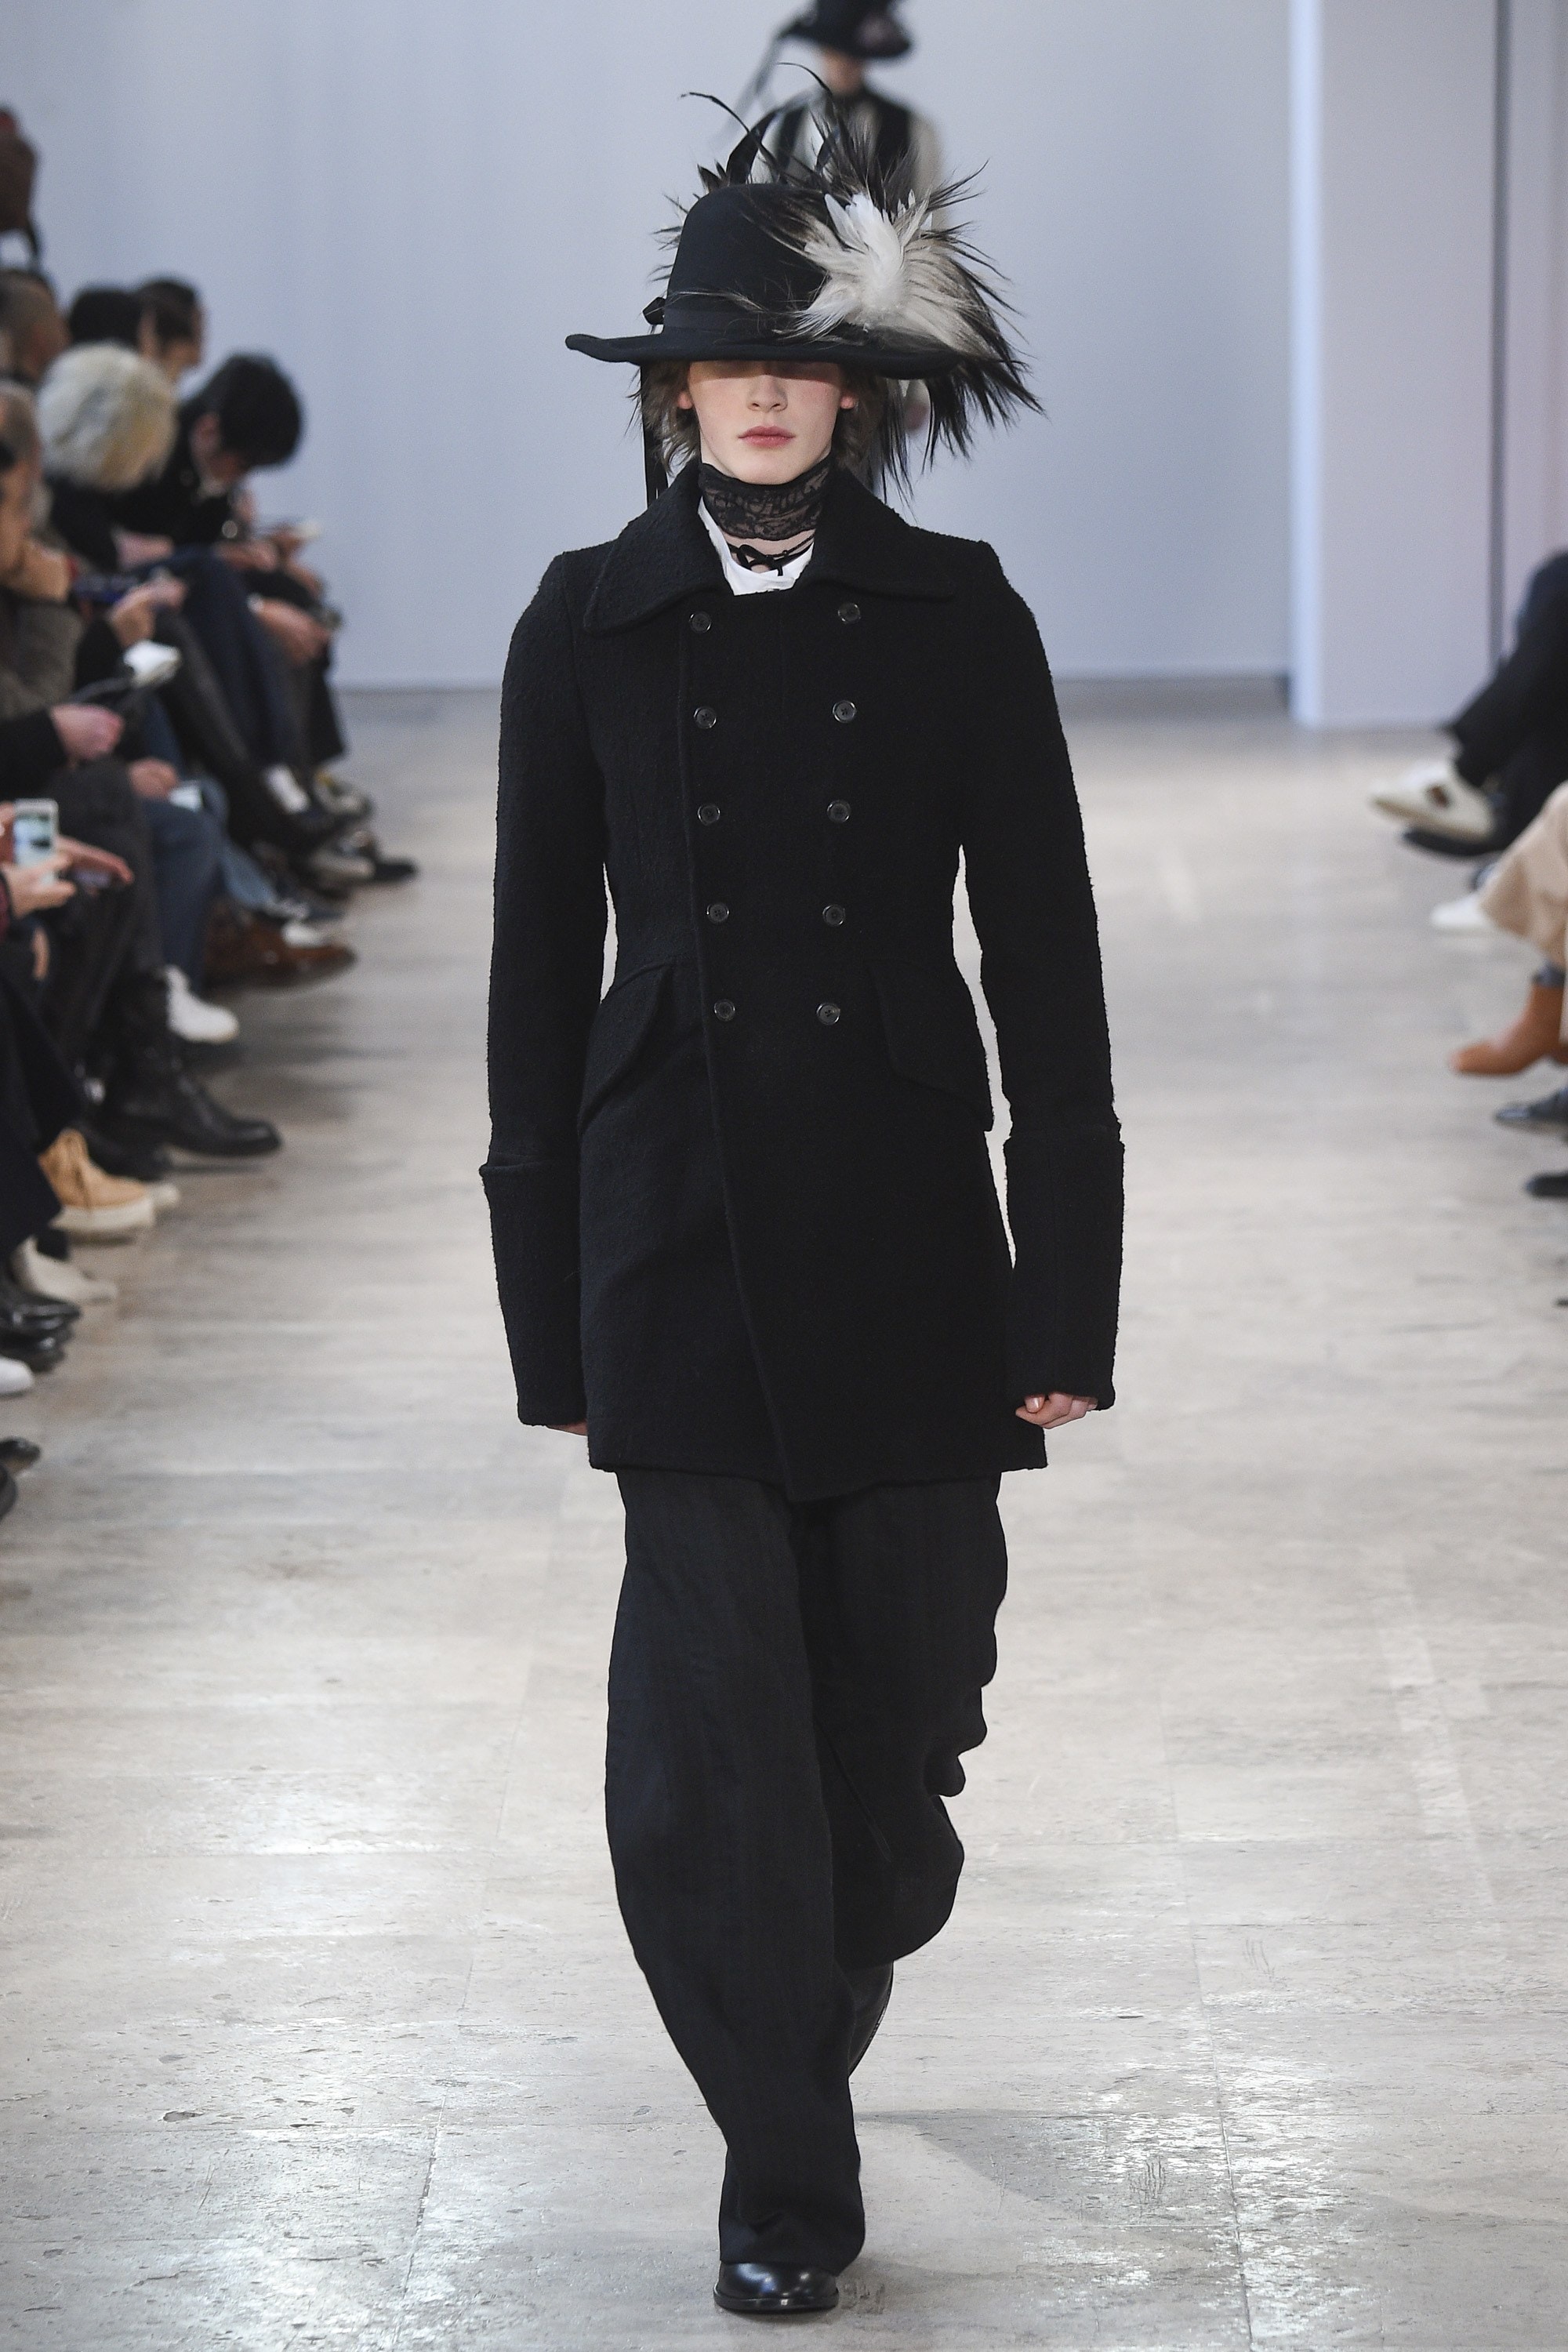 Ann Demeulemeester 2017 fall winter fashion style paris week pfw black clothes runway images photos